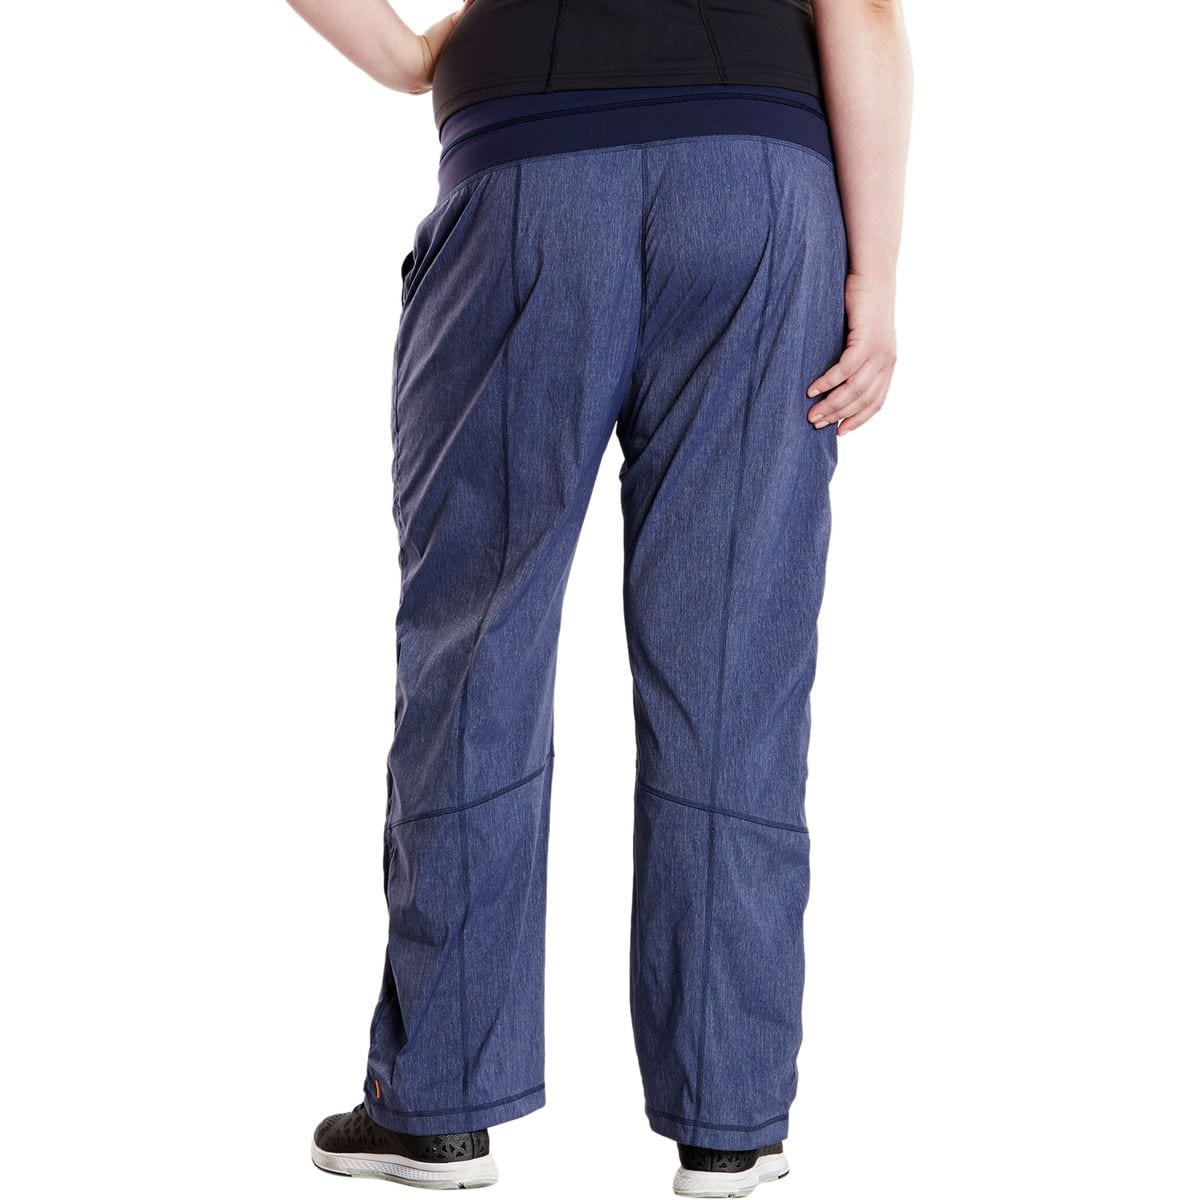 Lucy Get Going Pant - Women's - Clothing